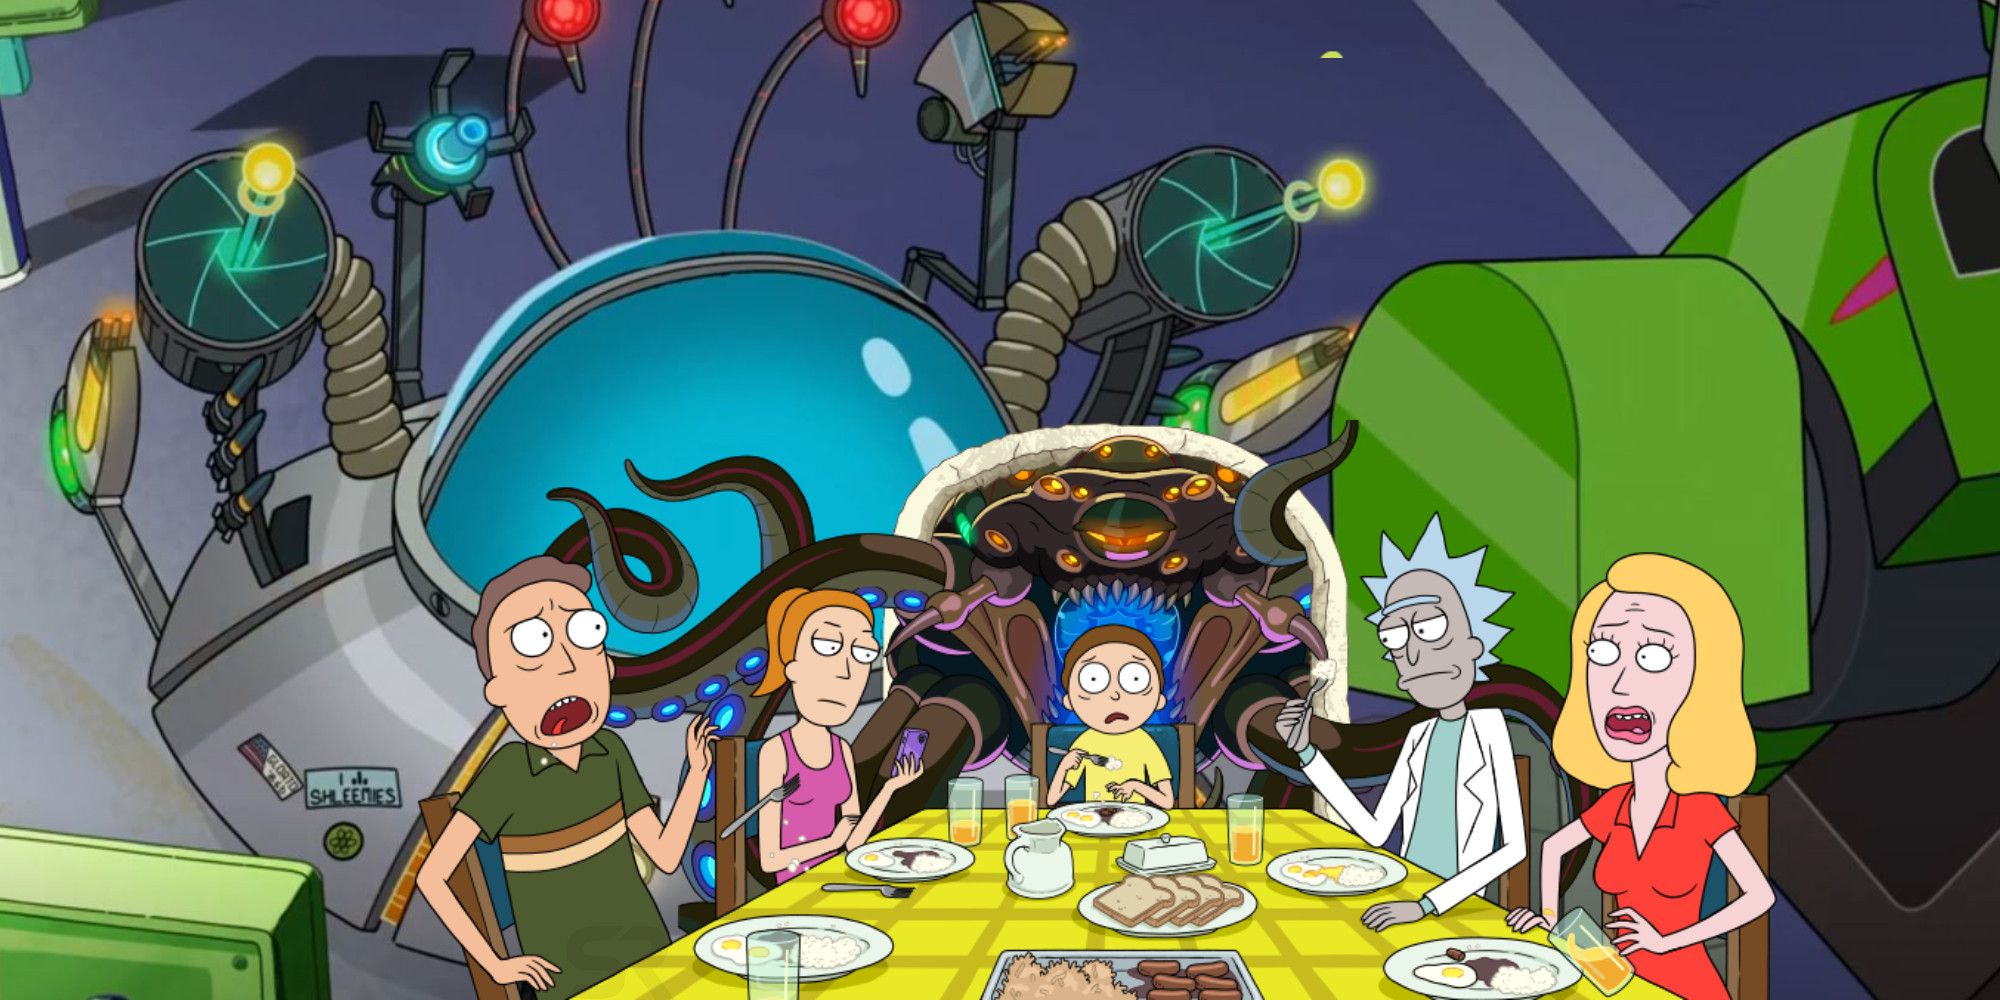 Rick's Ship and The Smith Family on Rick and Morty